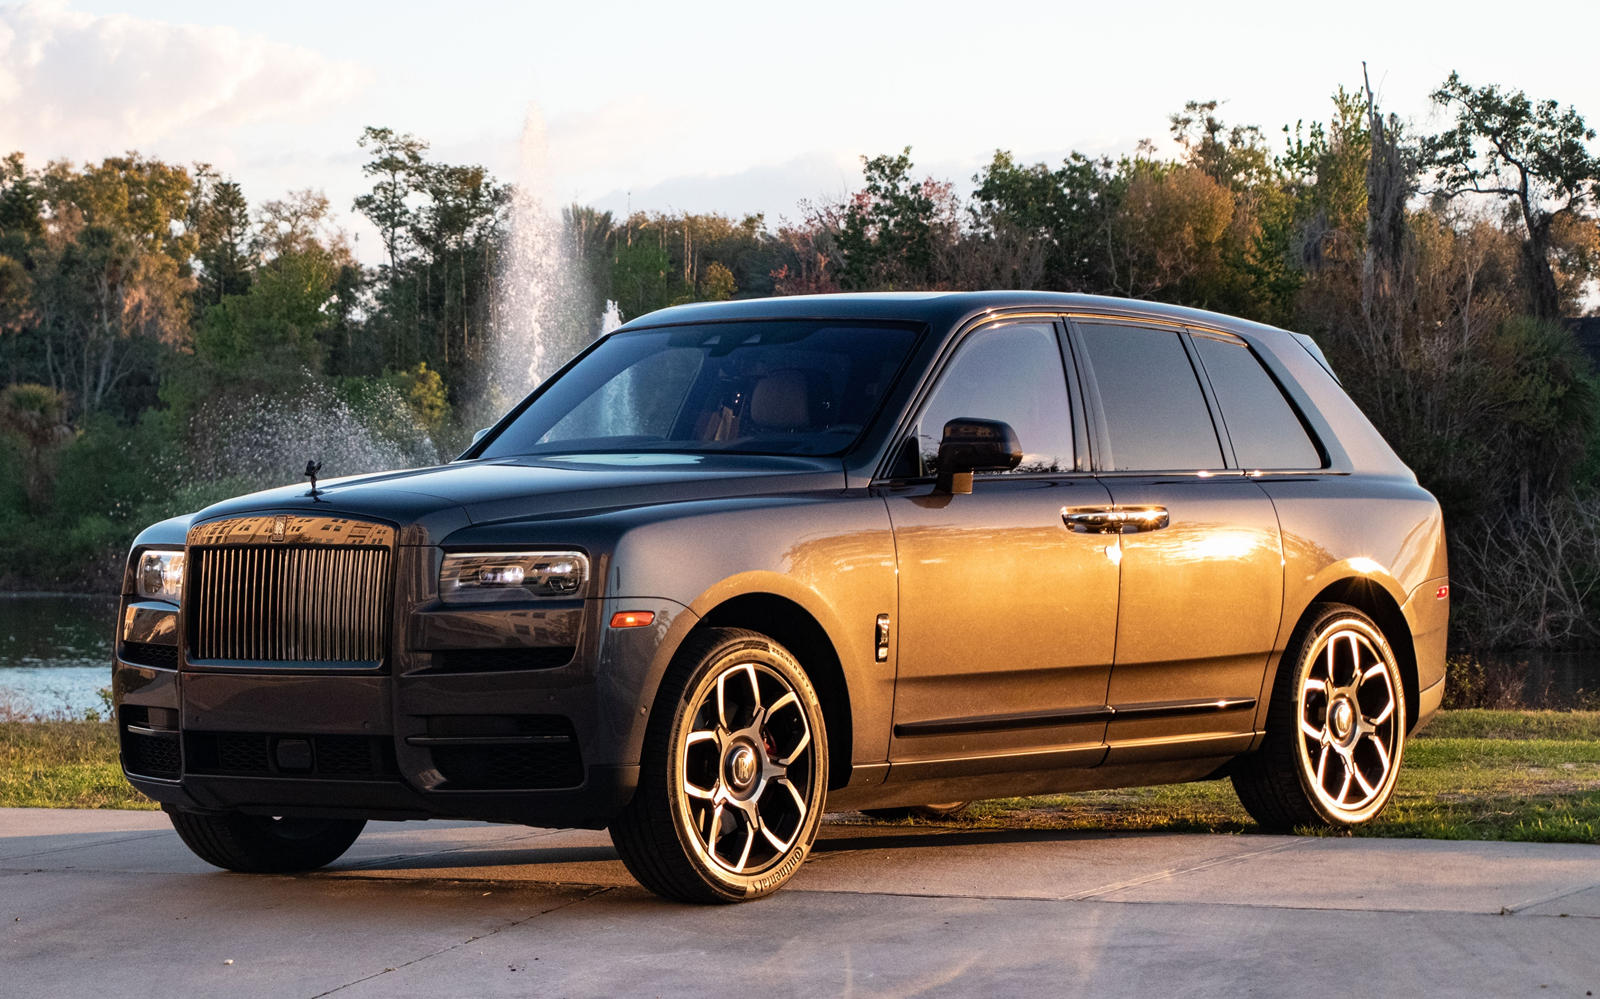 2020 Rolls-Royce Cullinan Black Badge photos and specs: blacked-out look  for the luxury SUV